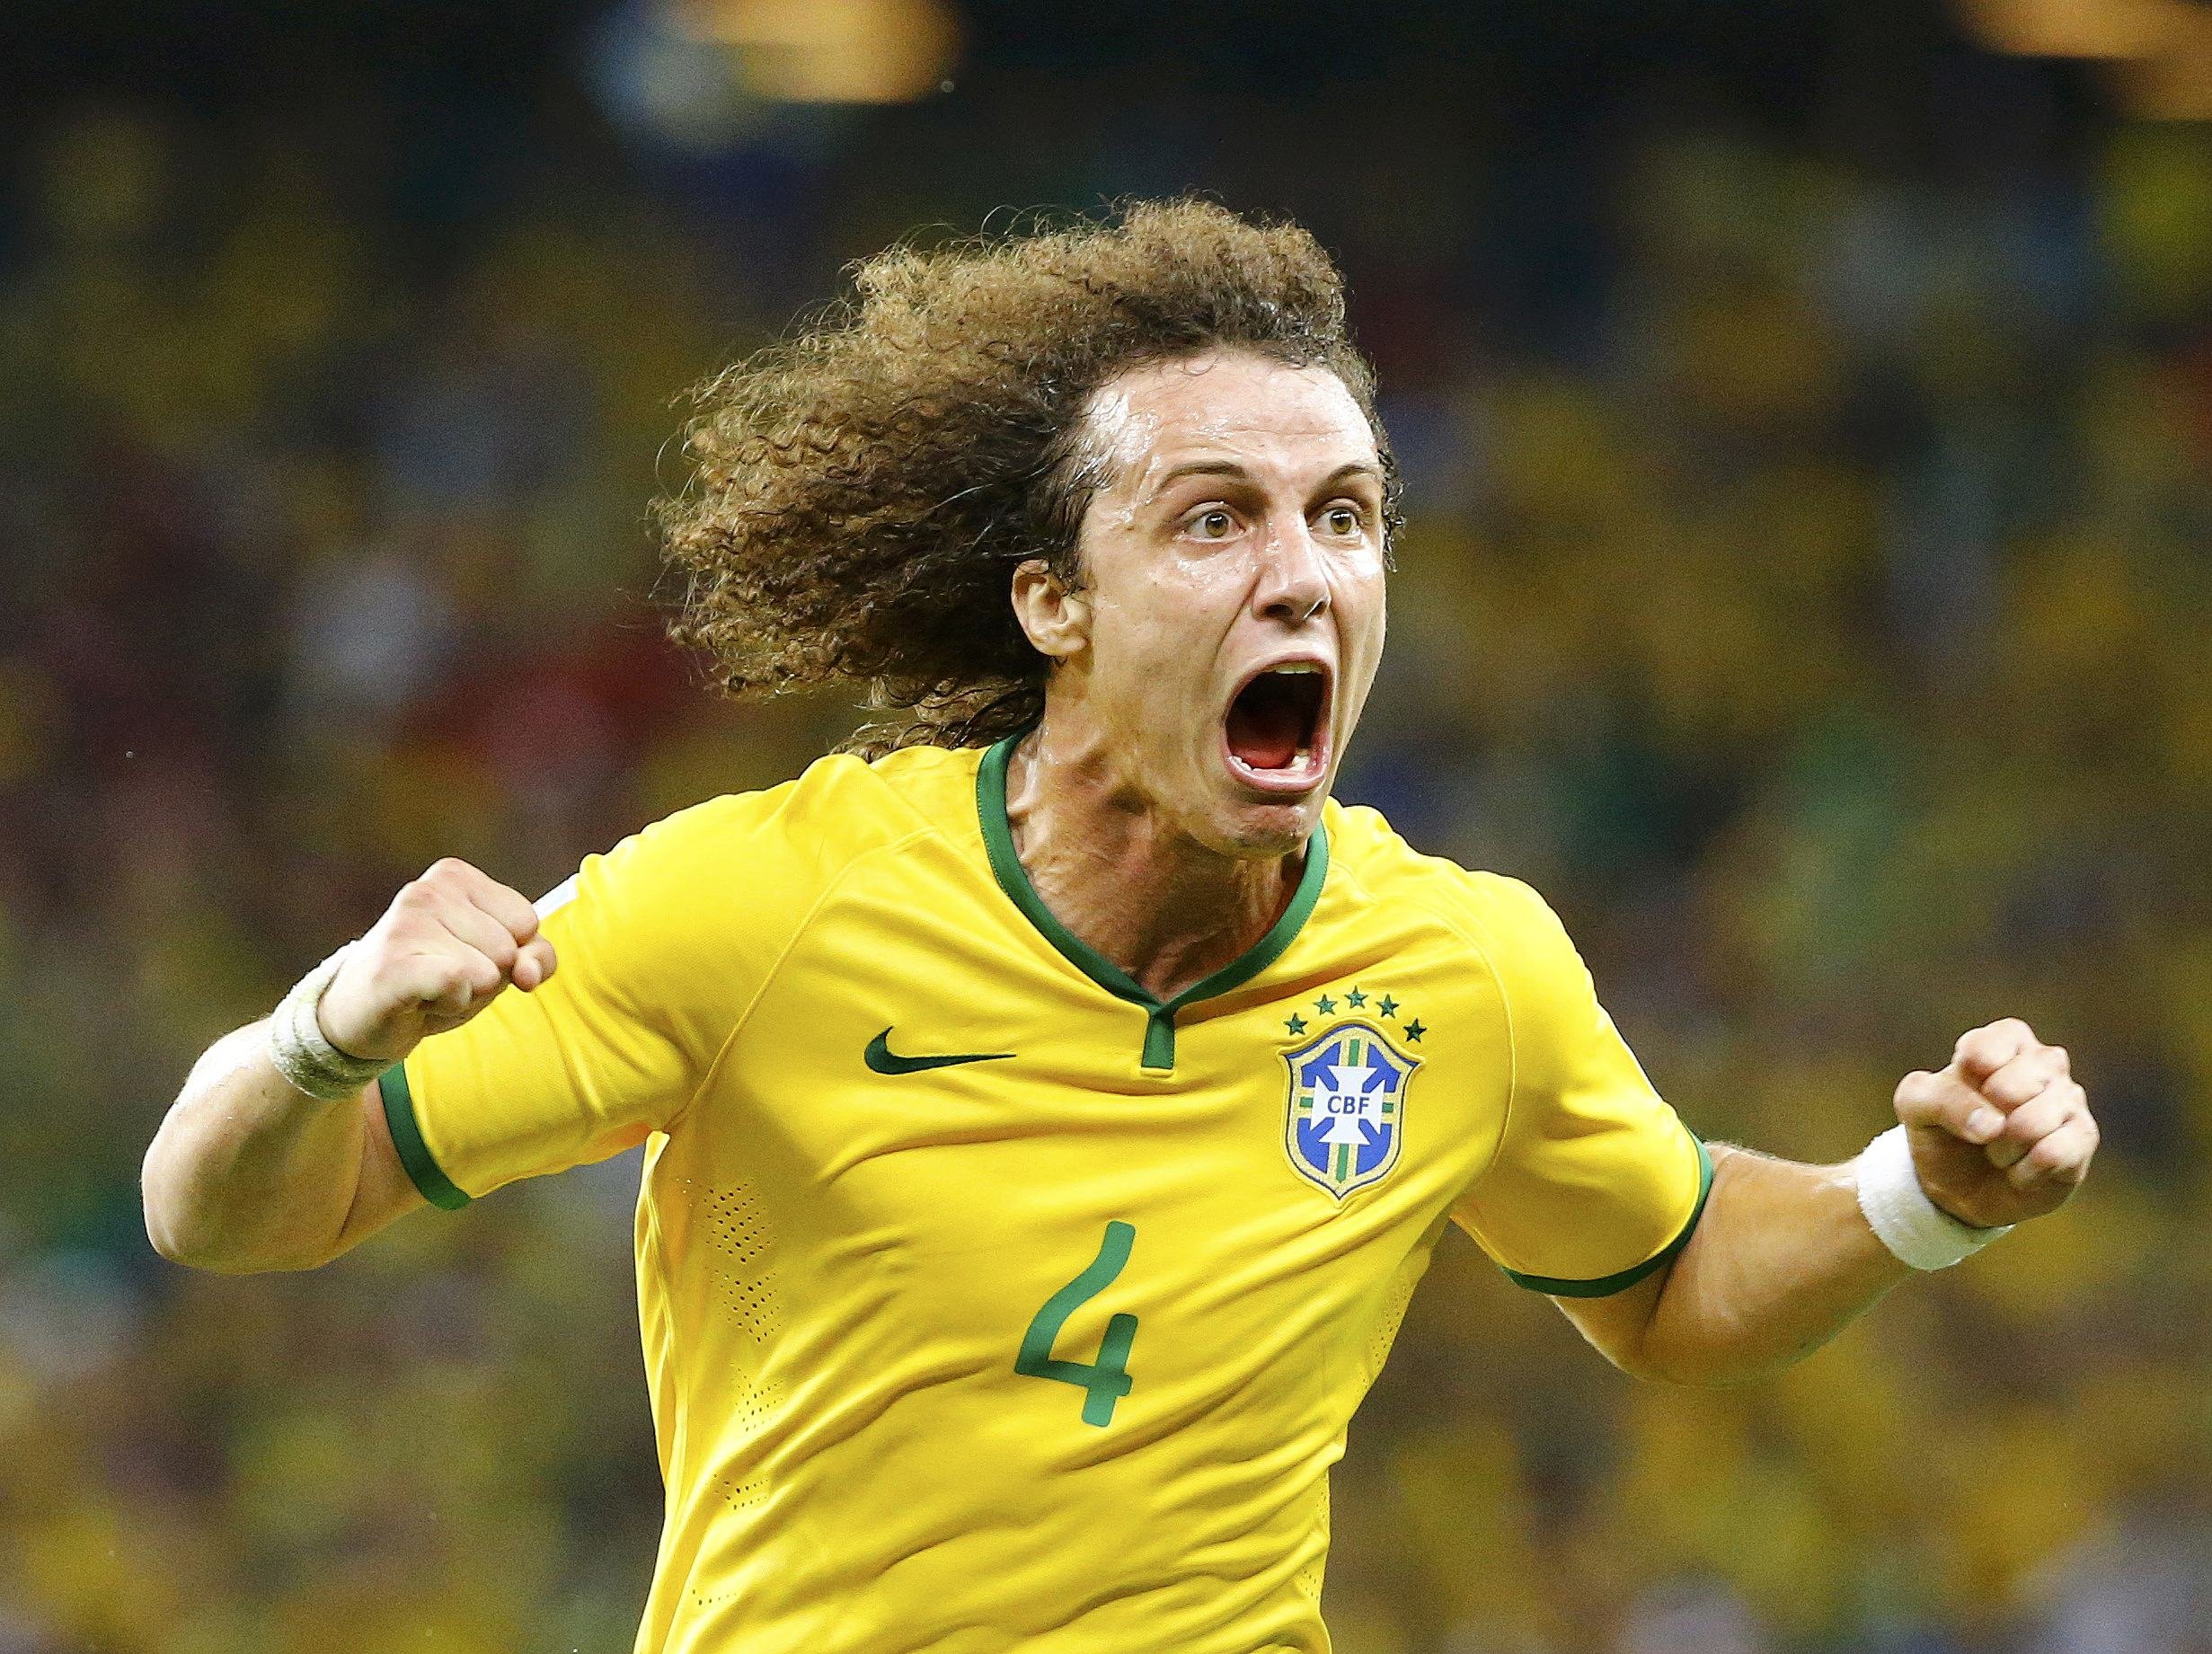 Brazil's David Luiz celebrates after scoring a goal against Colombia during the match at the Castelao arena in Fortaleza, Brazil on July 4, 2014.